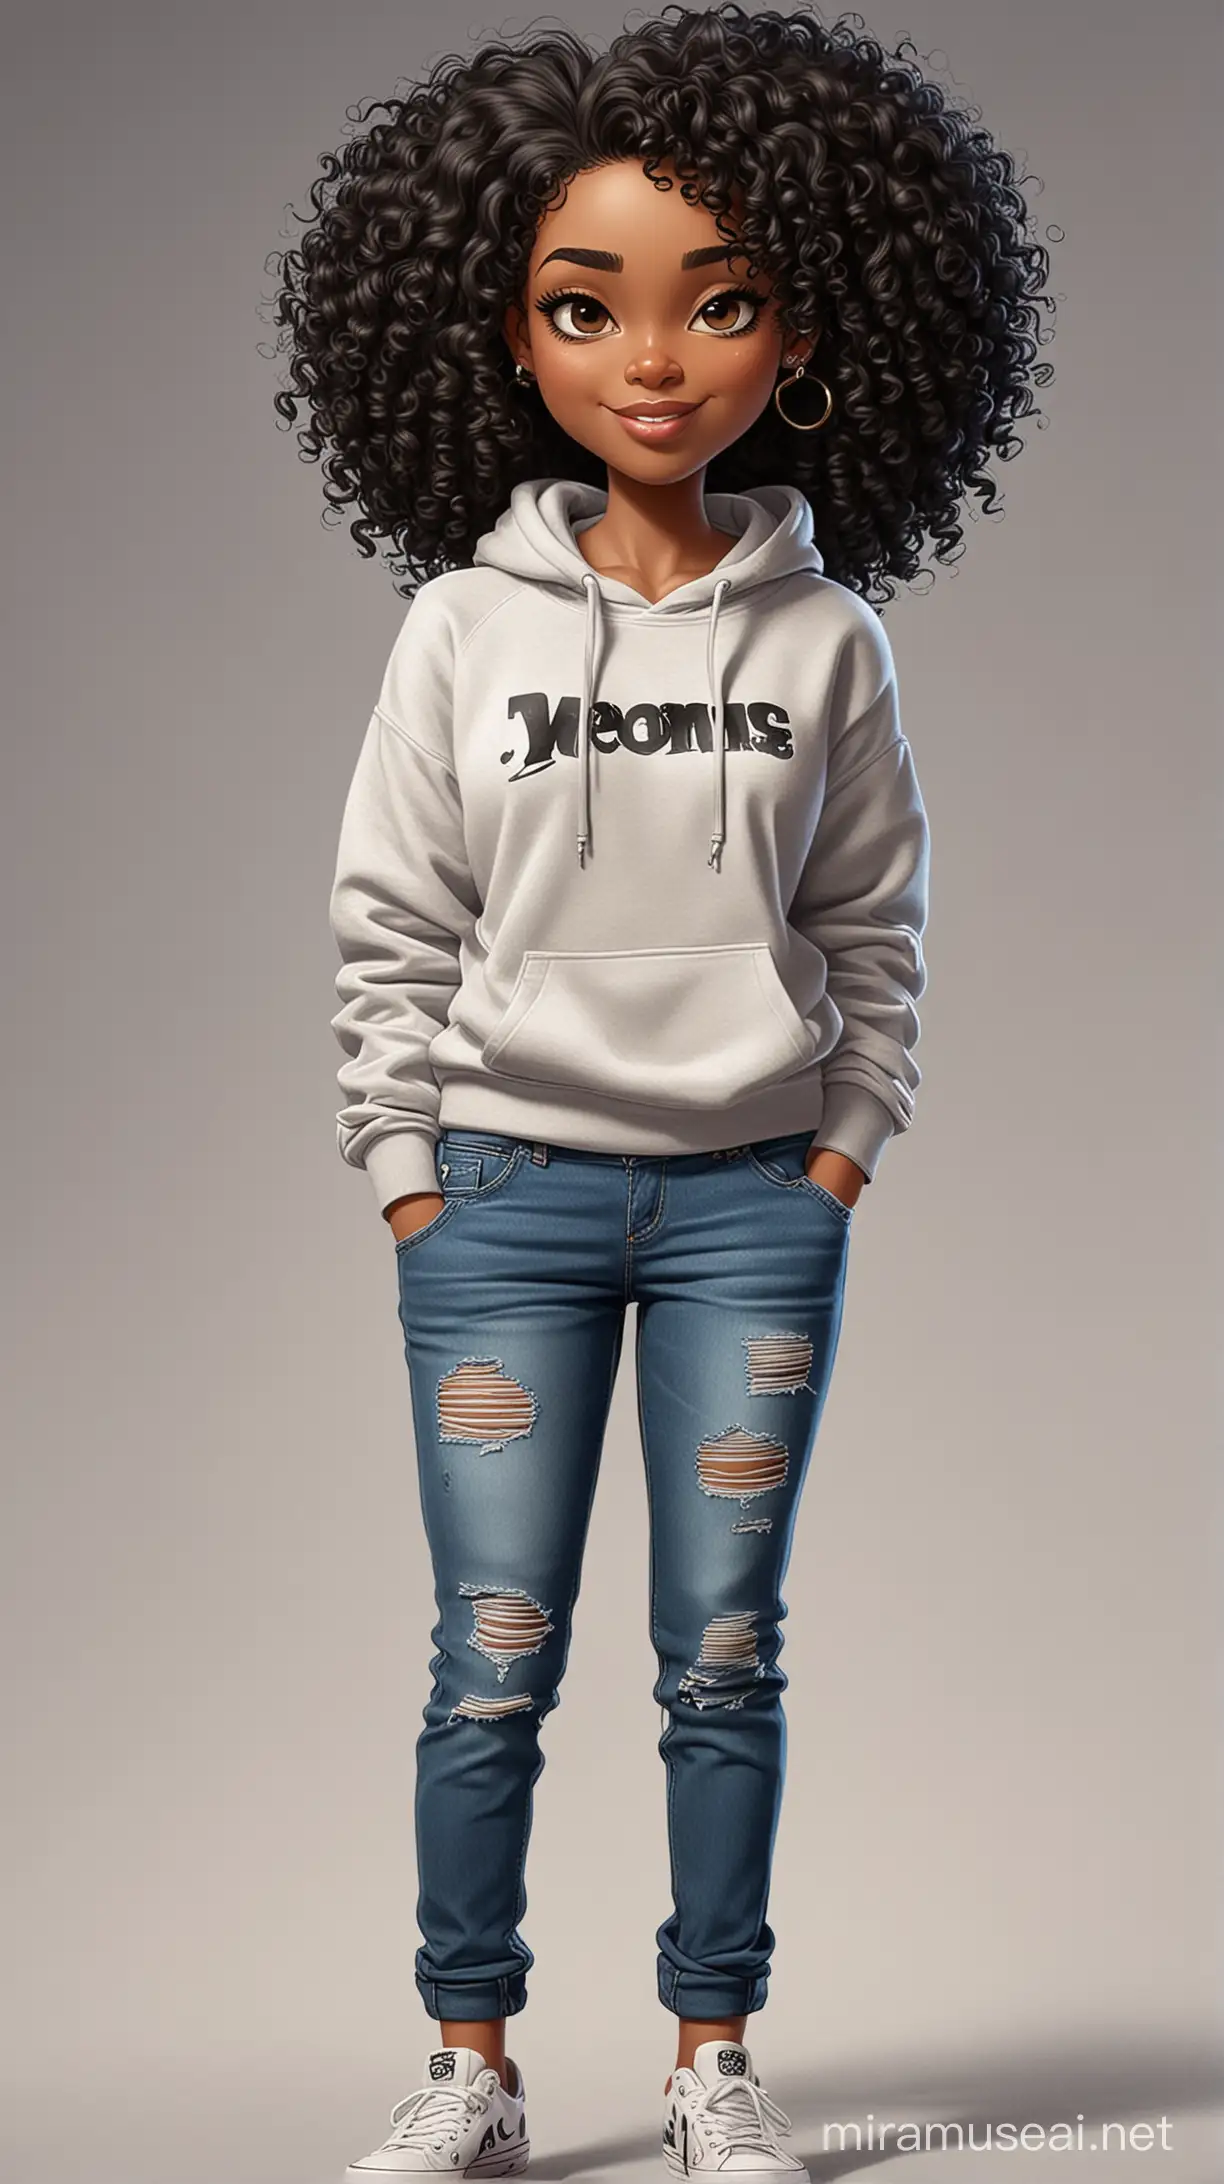 Cartoon image of a black woman with black curly hair, in a sweatshirt and jeans outfit. 